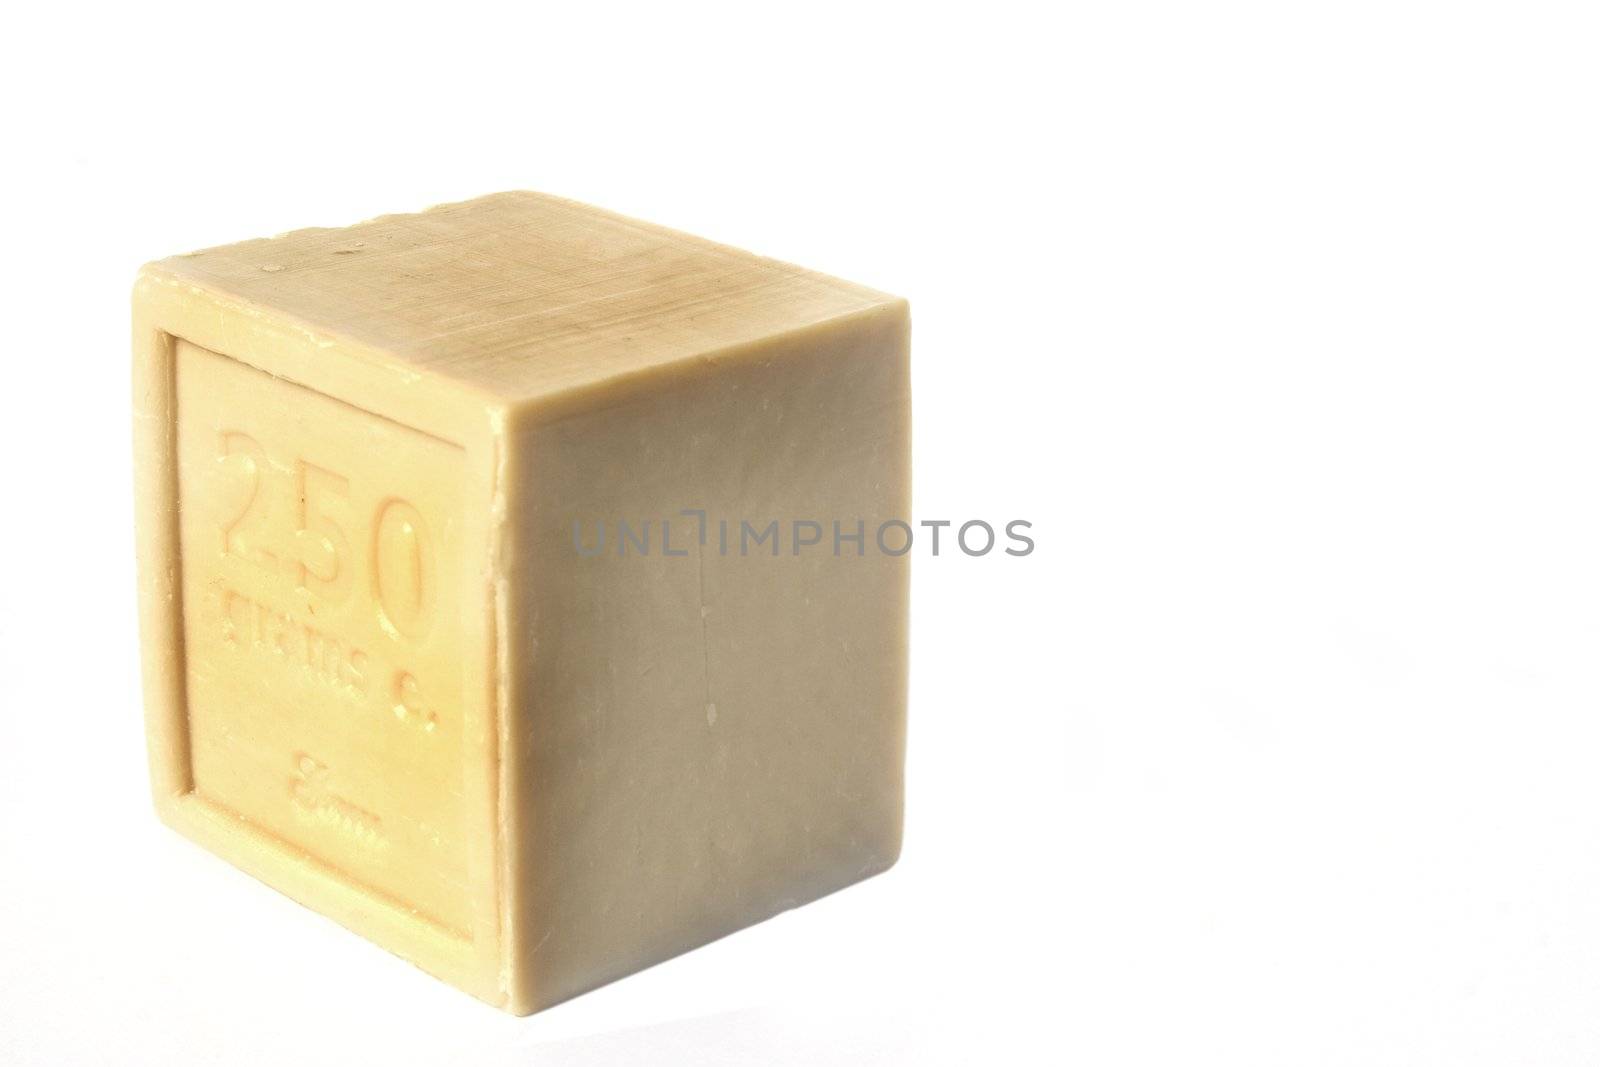 Square block of natural soap isolated against white background